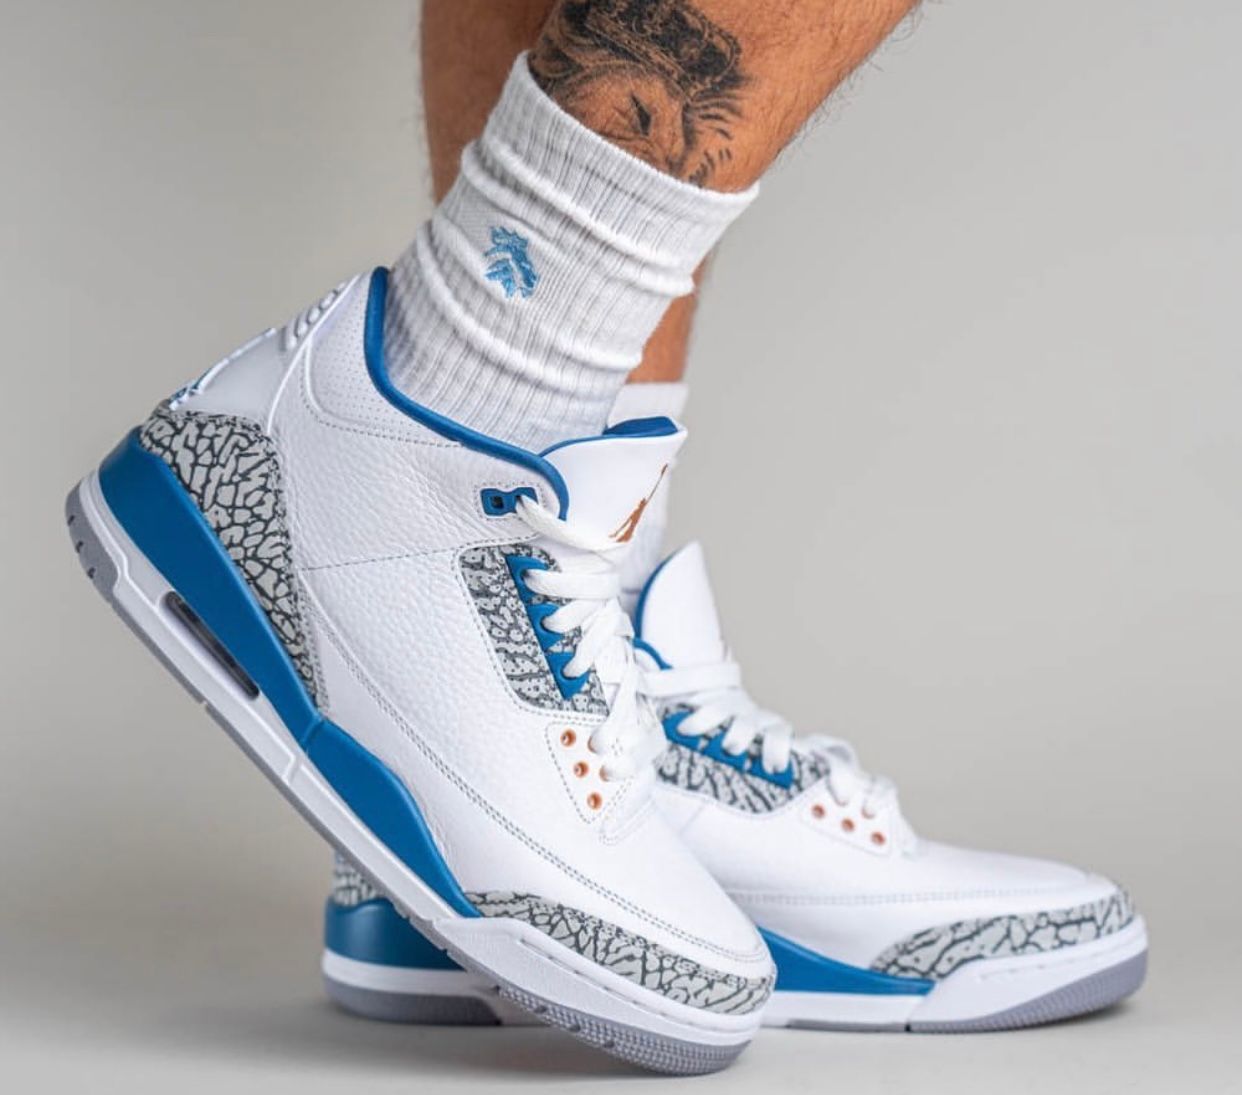 Air Jordan 3 Wizards Pe C T8532 148 Release Date on Foot Lateral